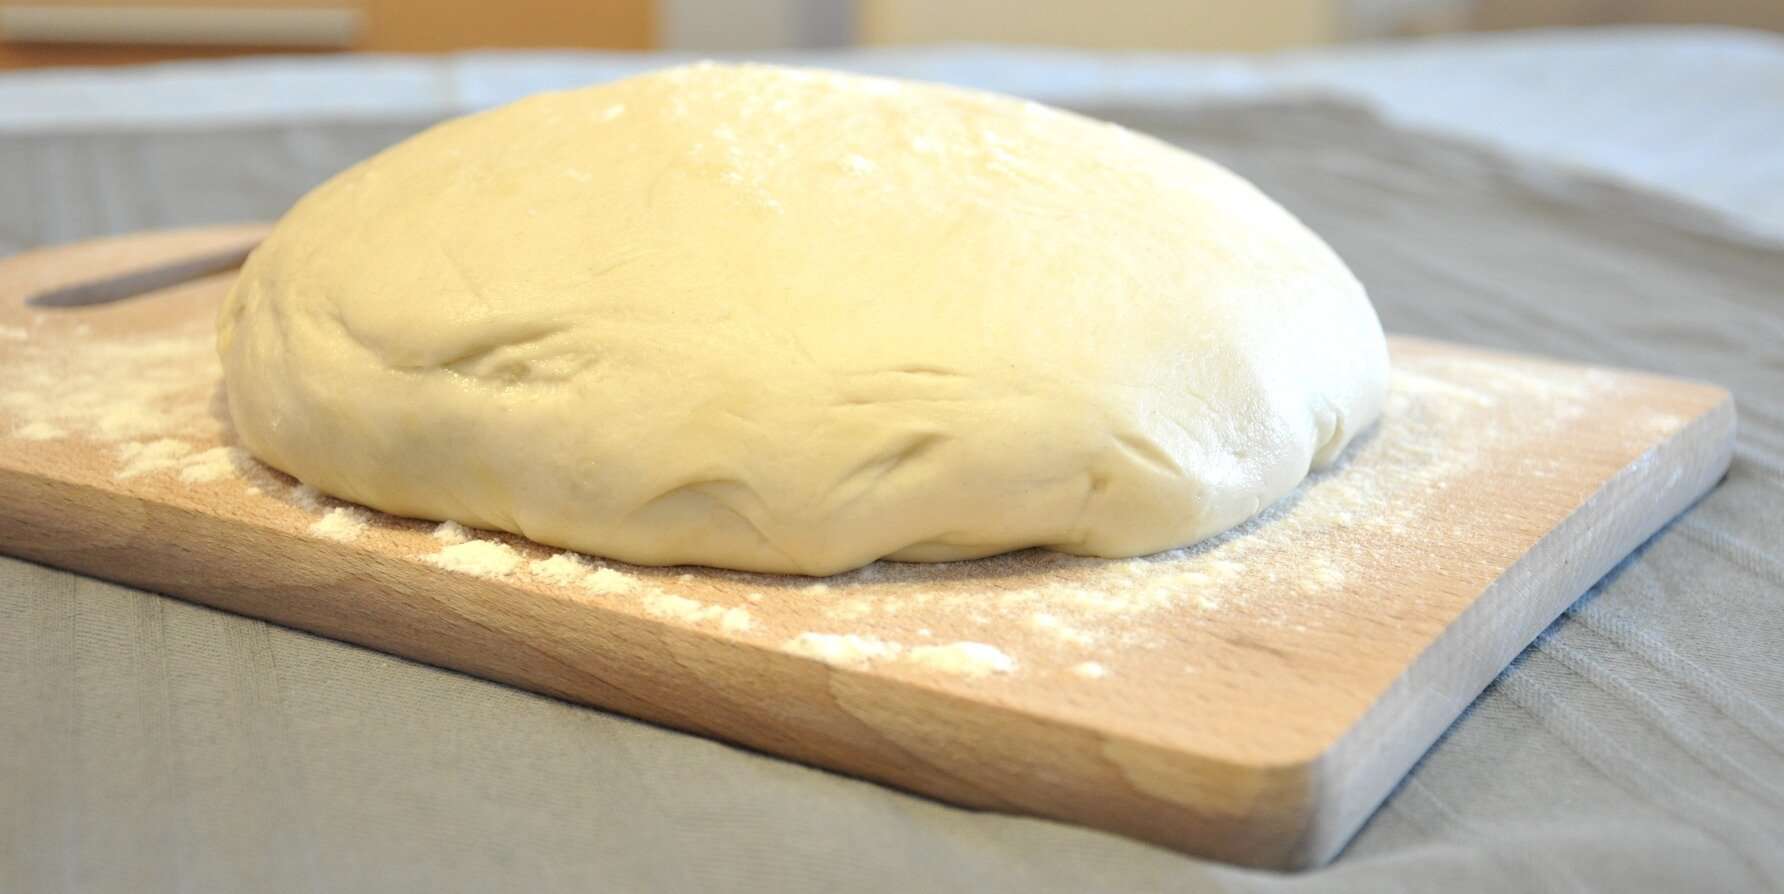 homemade pizza dough from scratch on wooden cutting board profamilychef